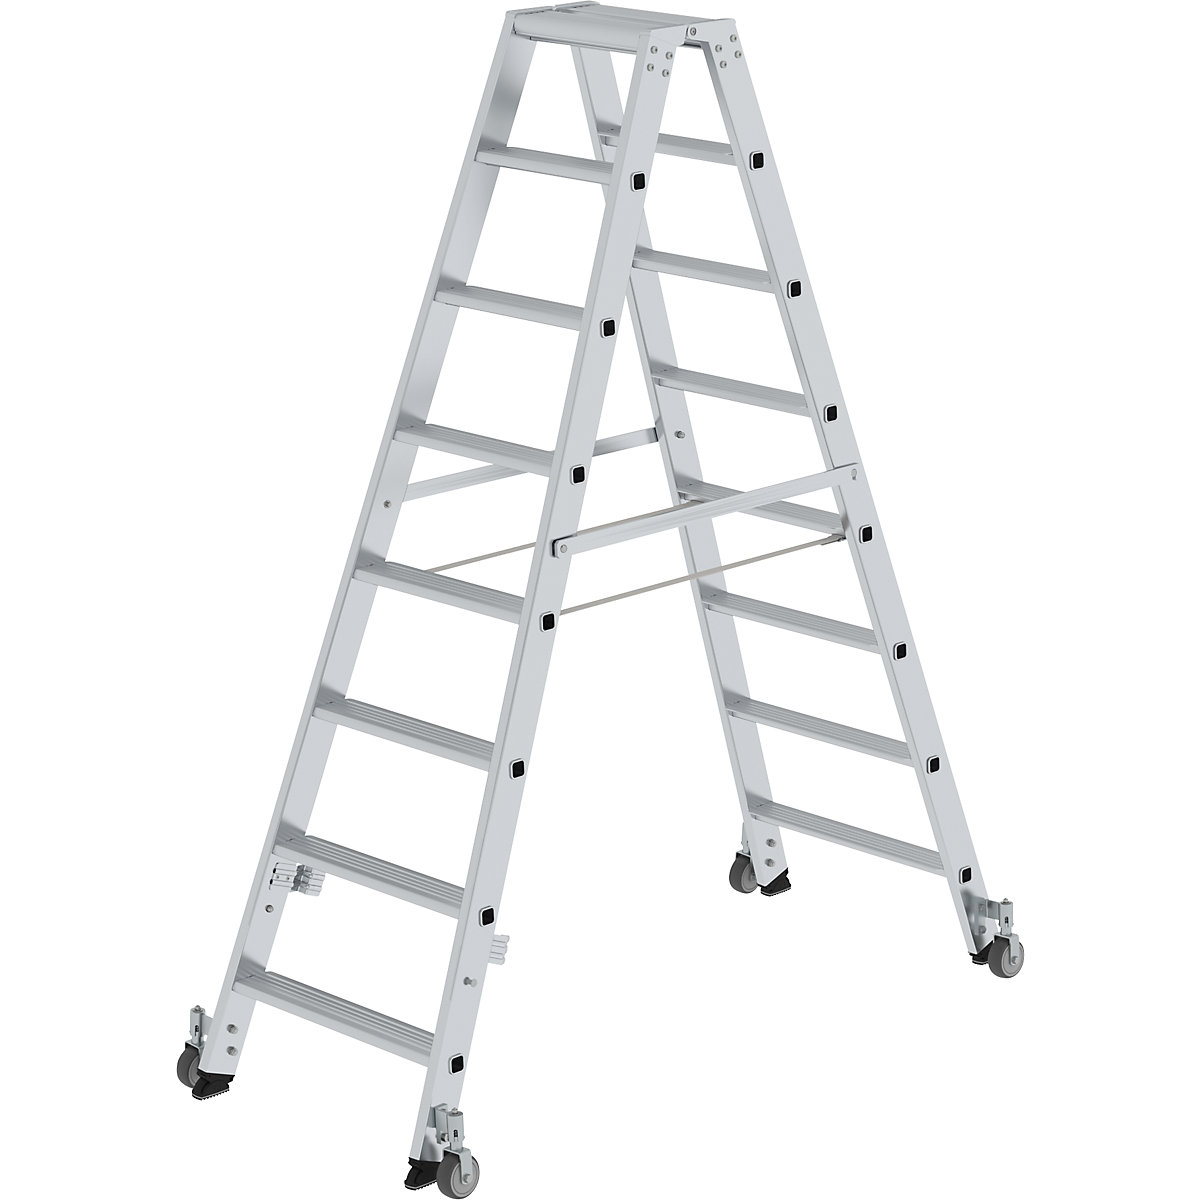 Step ladder, double sided – MUNK, mobile model, 2 x 8 steps-6